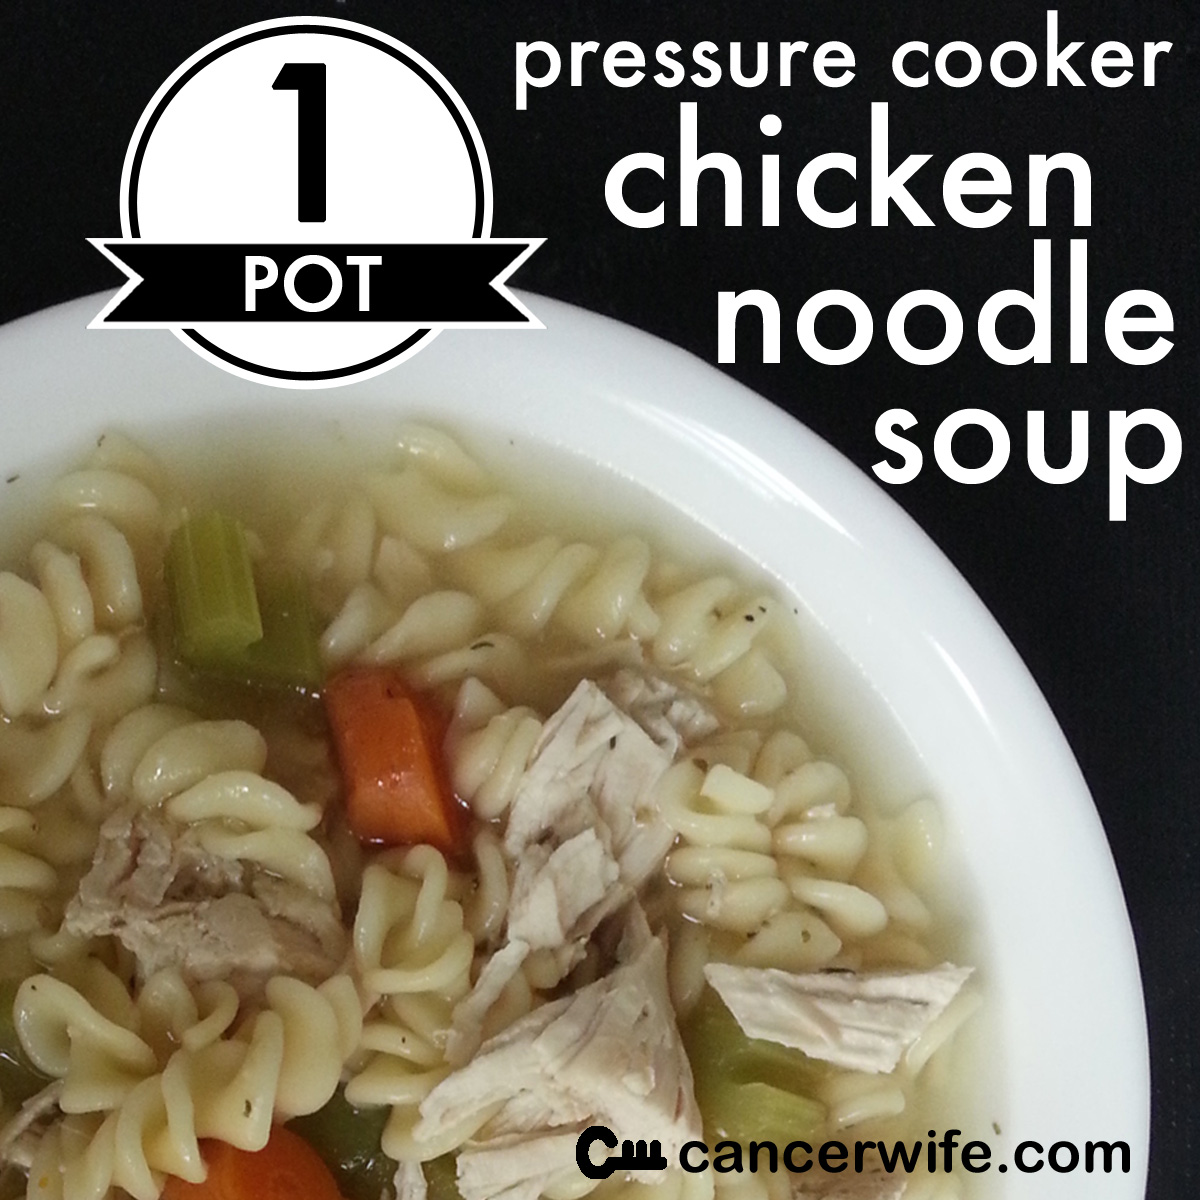 One Pot Pressure Cooker Instant Pot Chicken Noodle Soup recipe, Healthy Eating at Home with Cancerwife